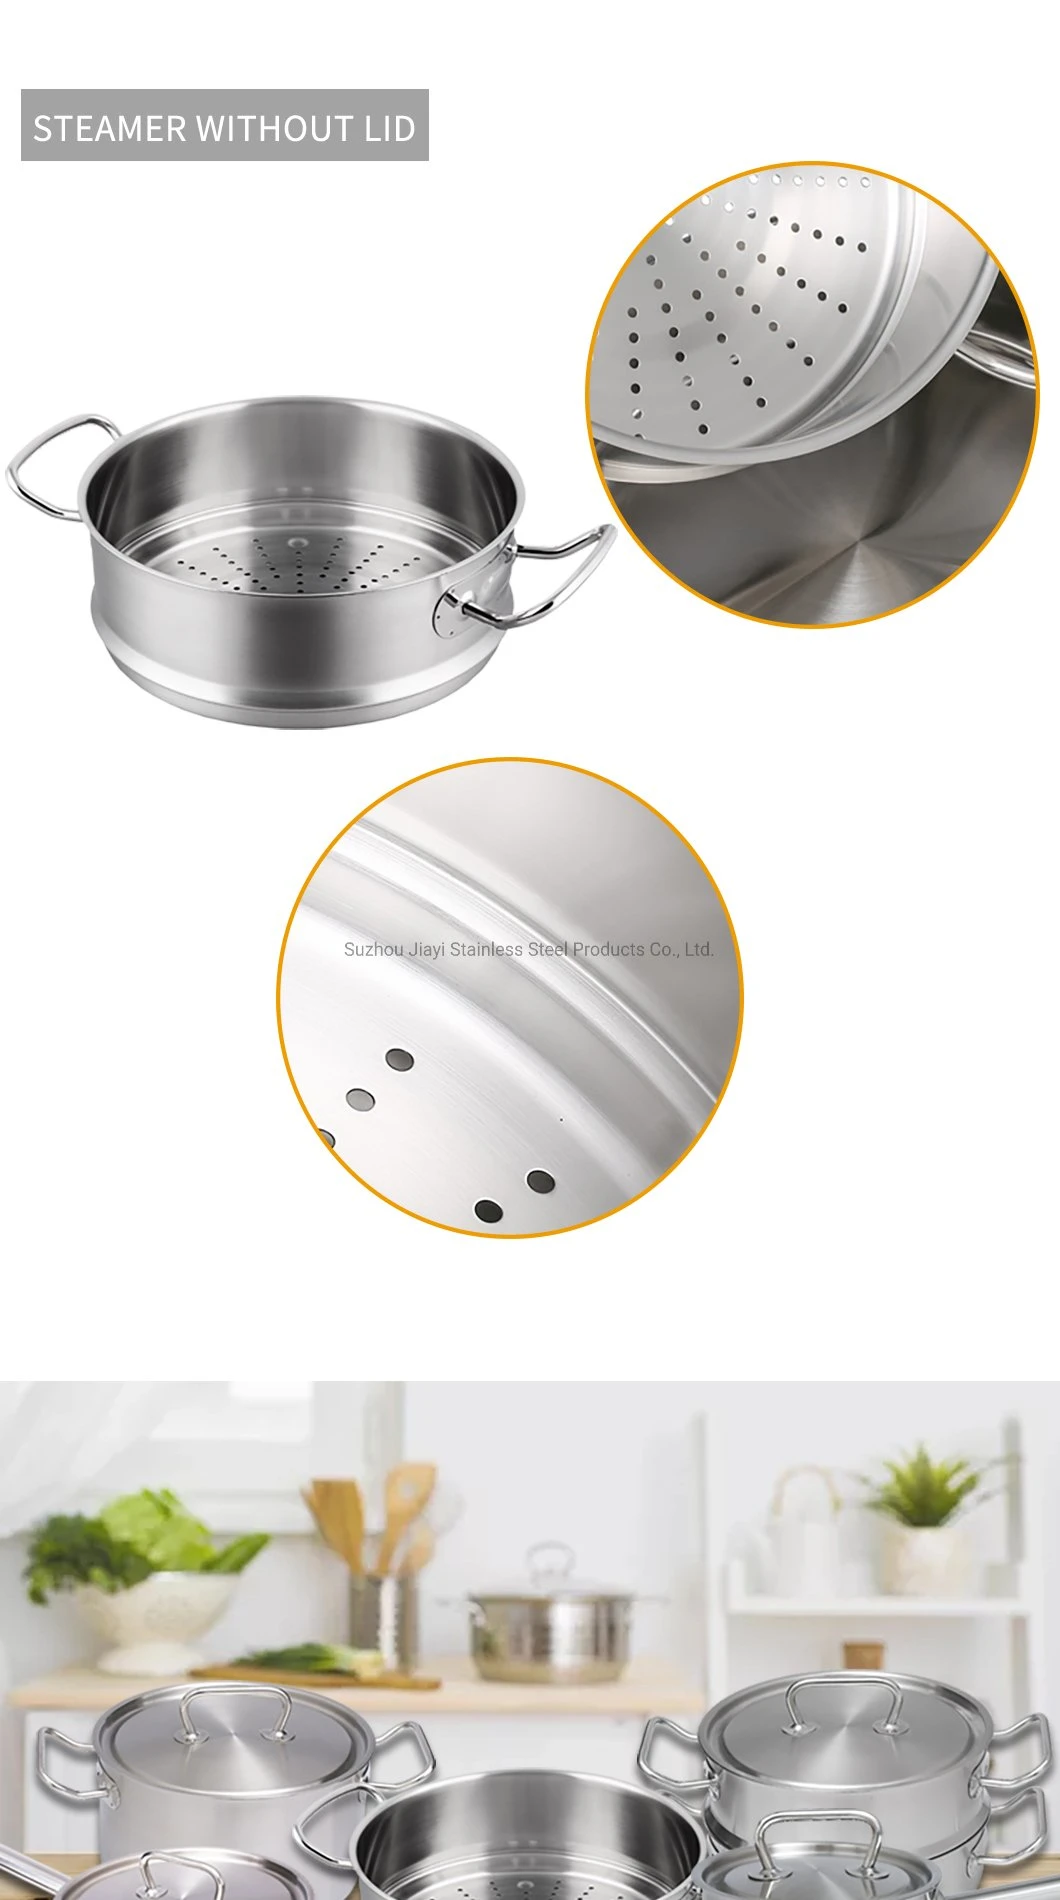 Low Price Cookware Kitchen Cookware Sets Saucepans Cookware Manufacture in China Jy-1675dgb